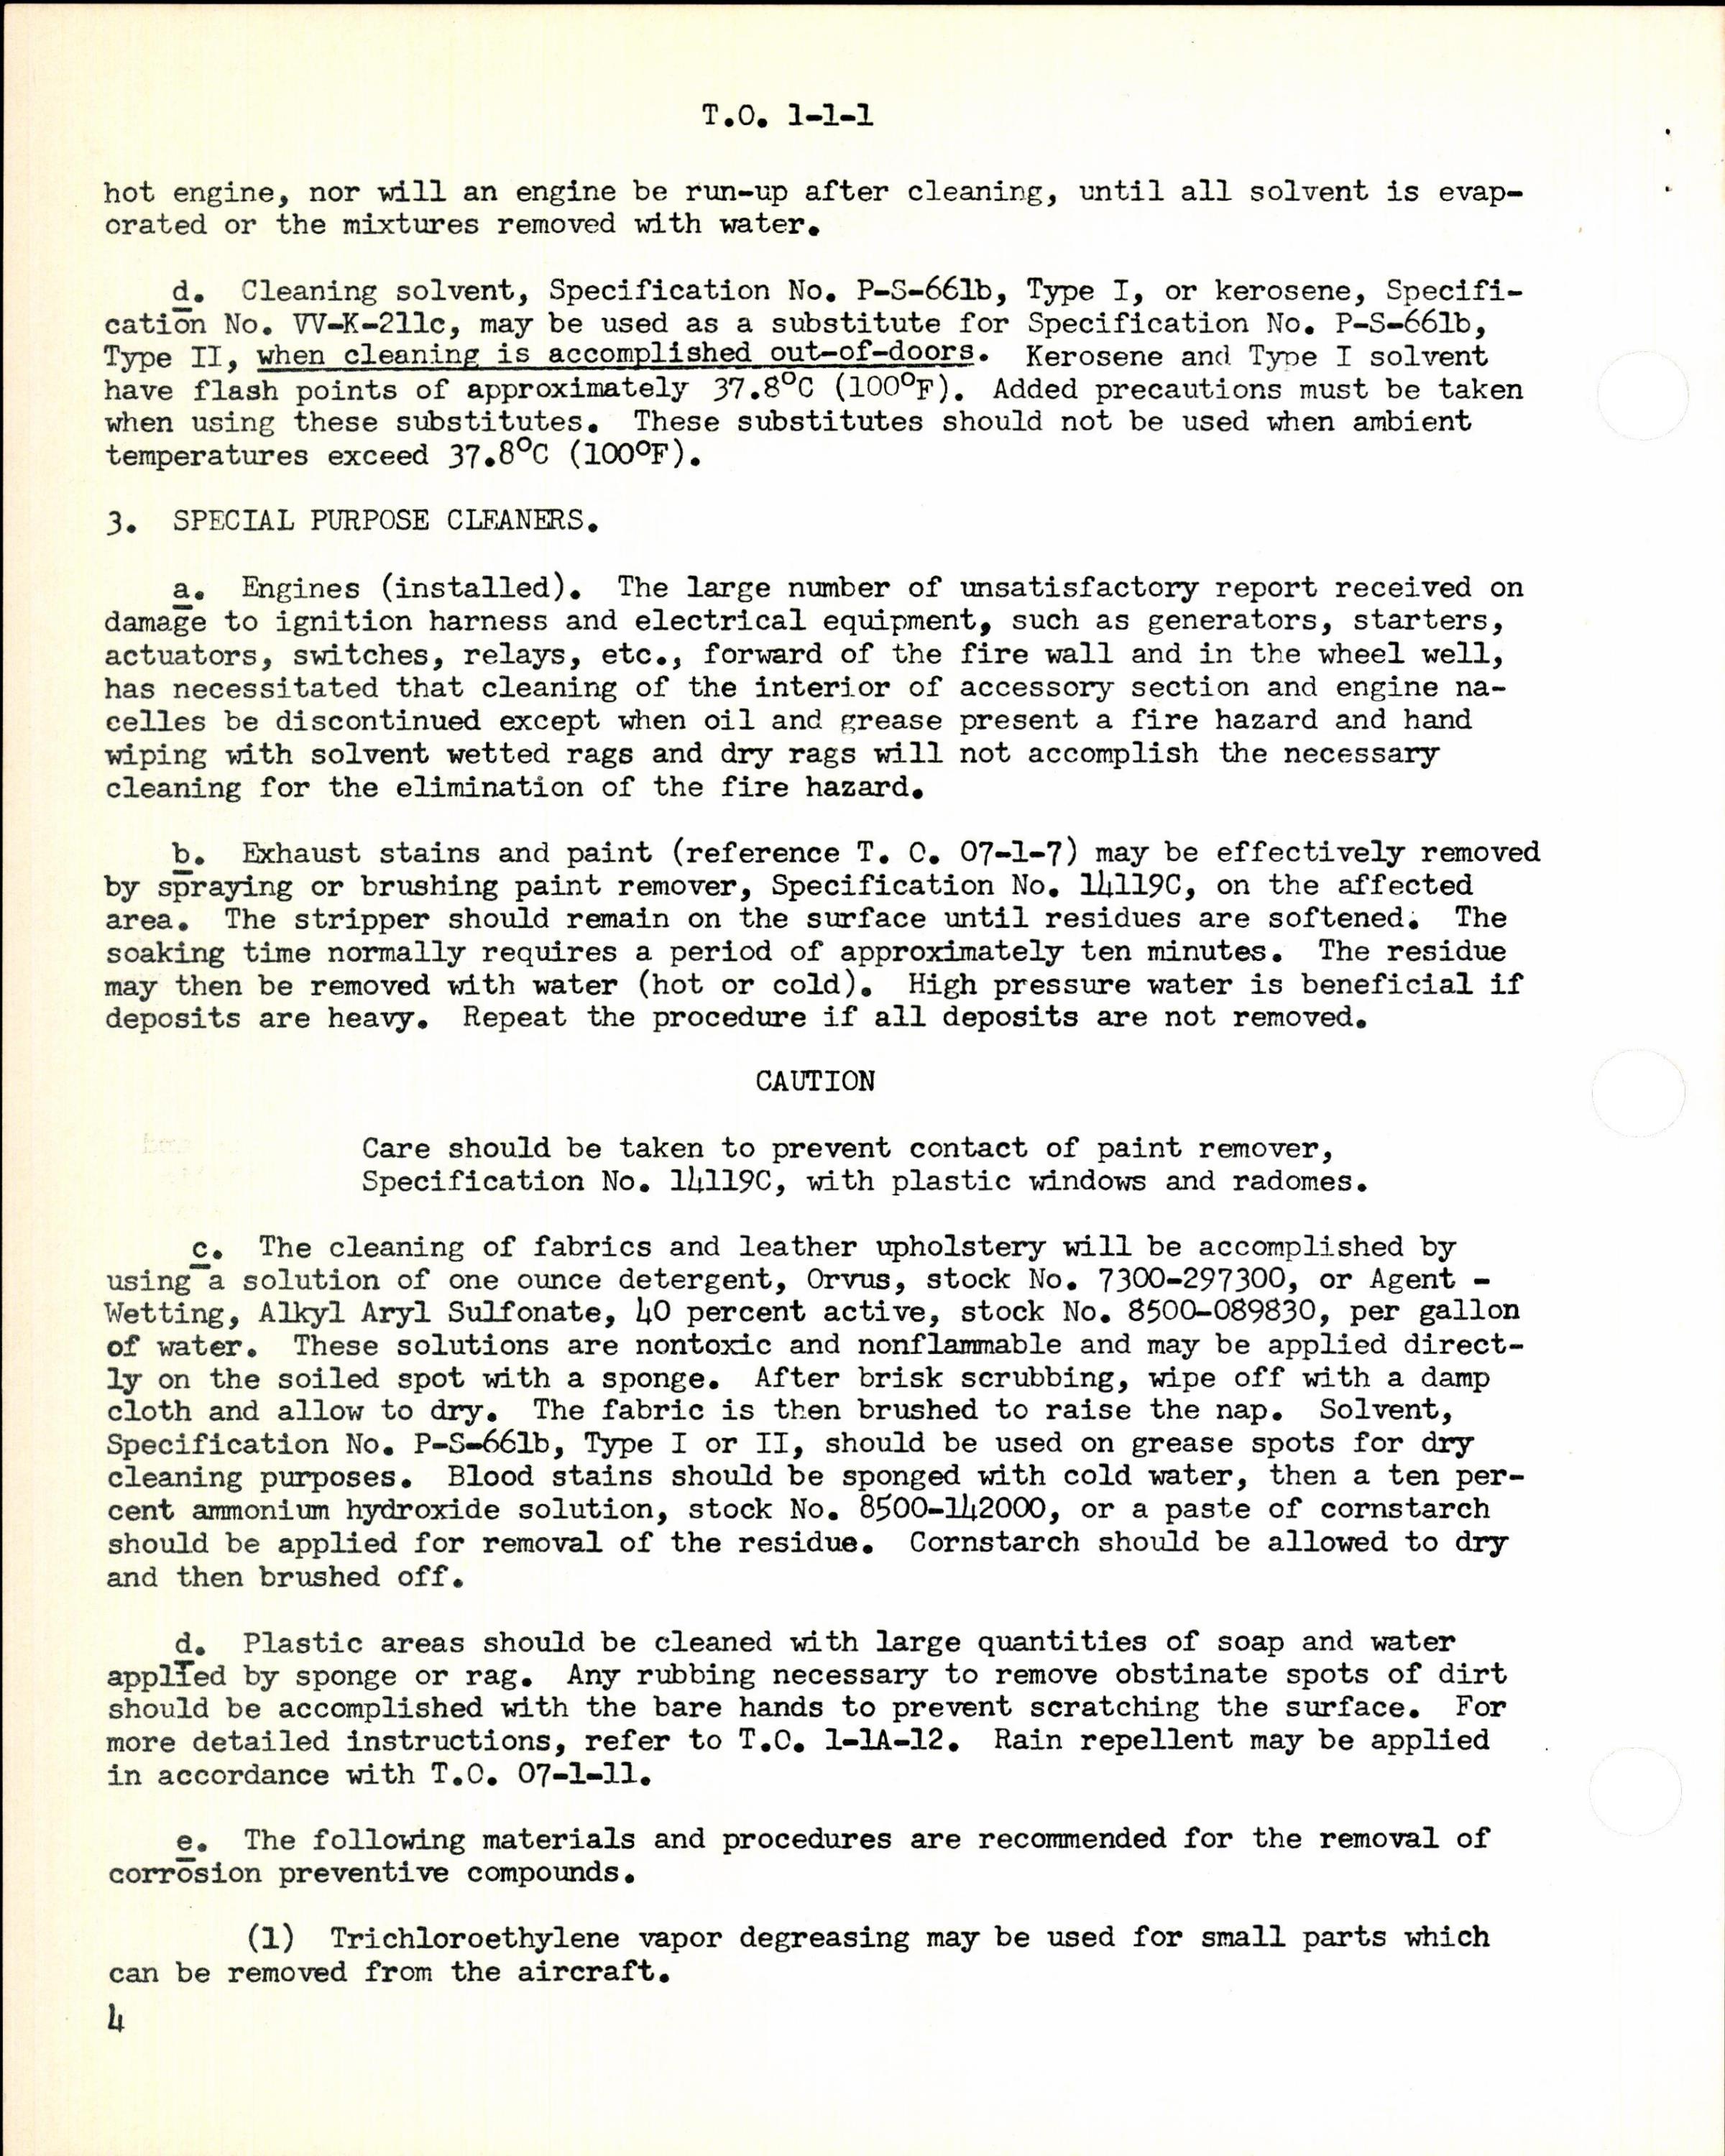 Sample page 4 from AirCorps Library document: Cleaning of Aeronautical Equipment